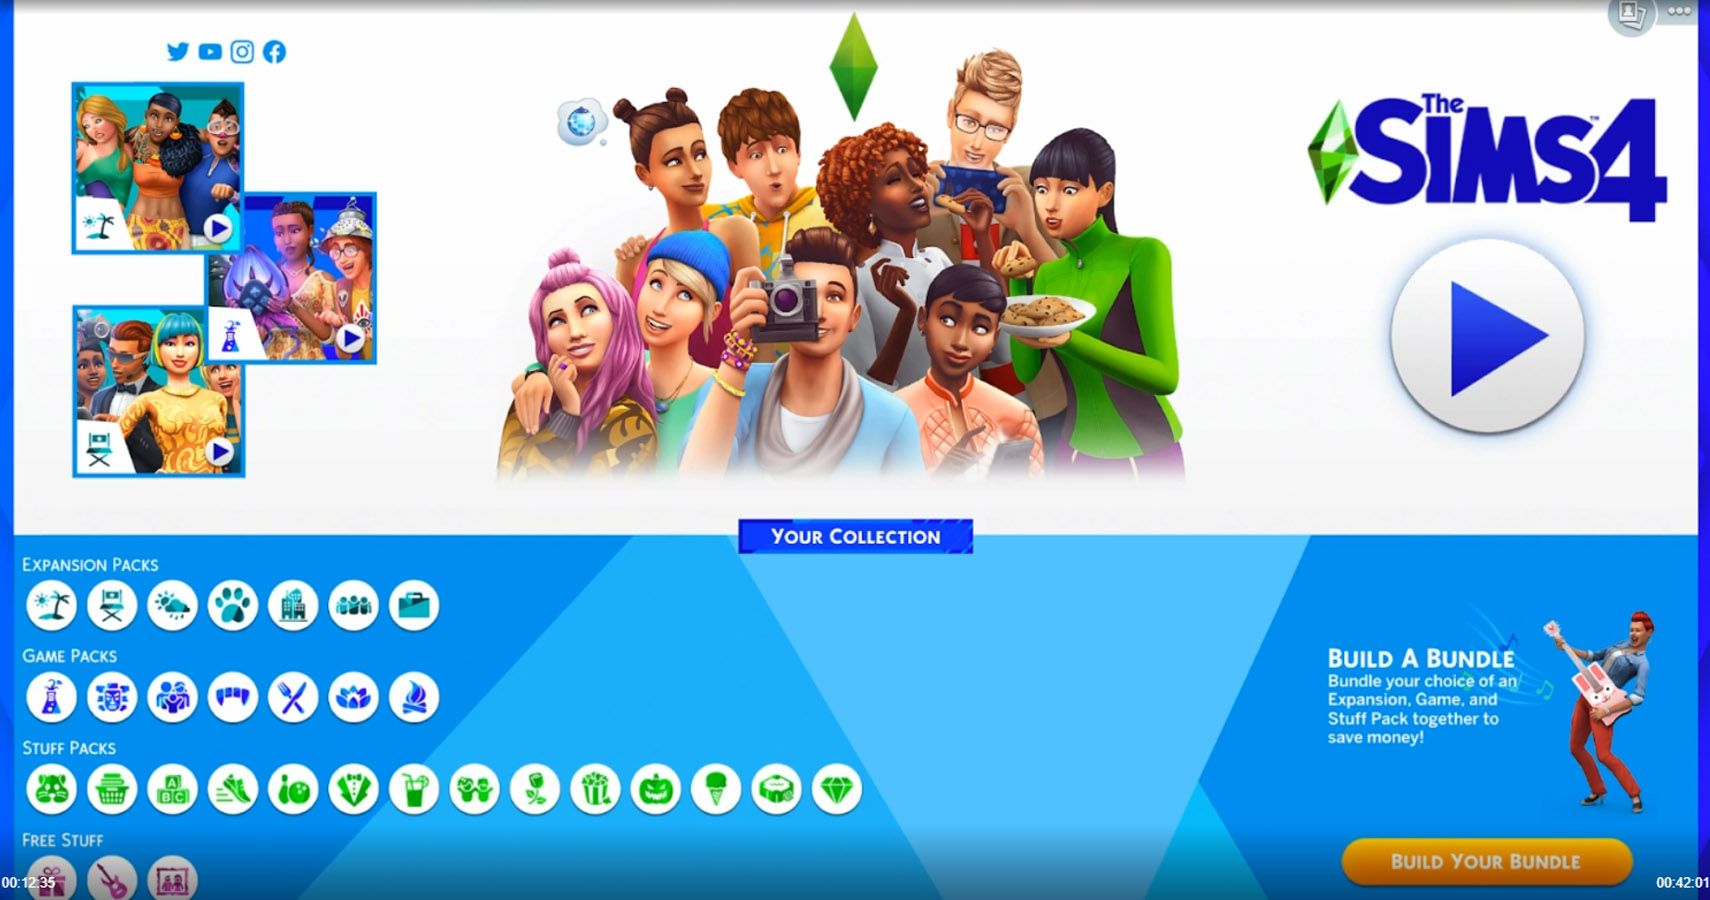 Sims 4 Team Announces Brand New Look For The Game